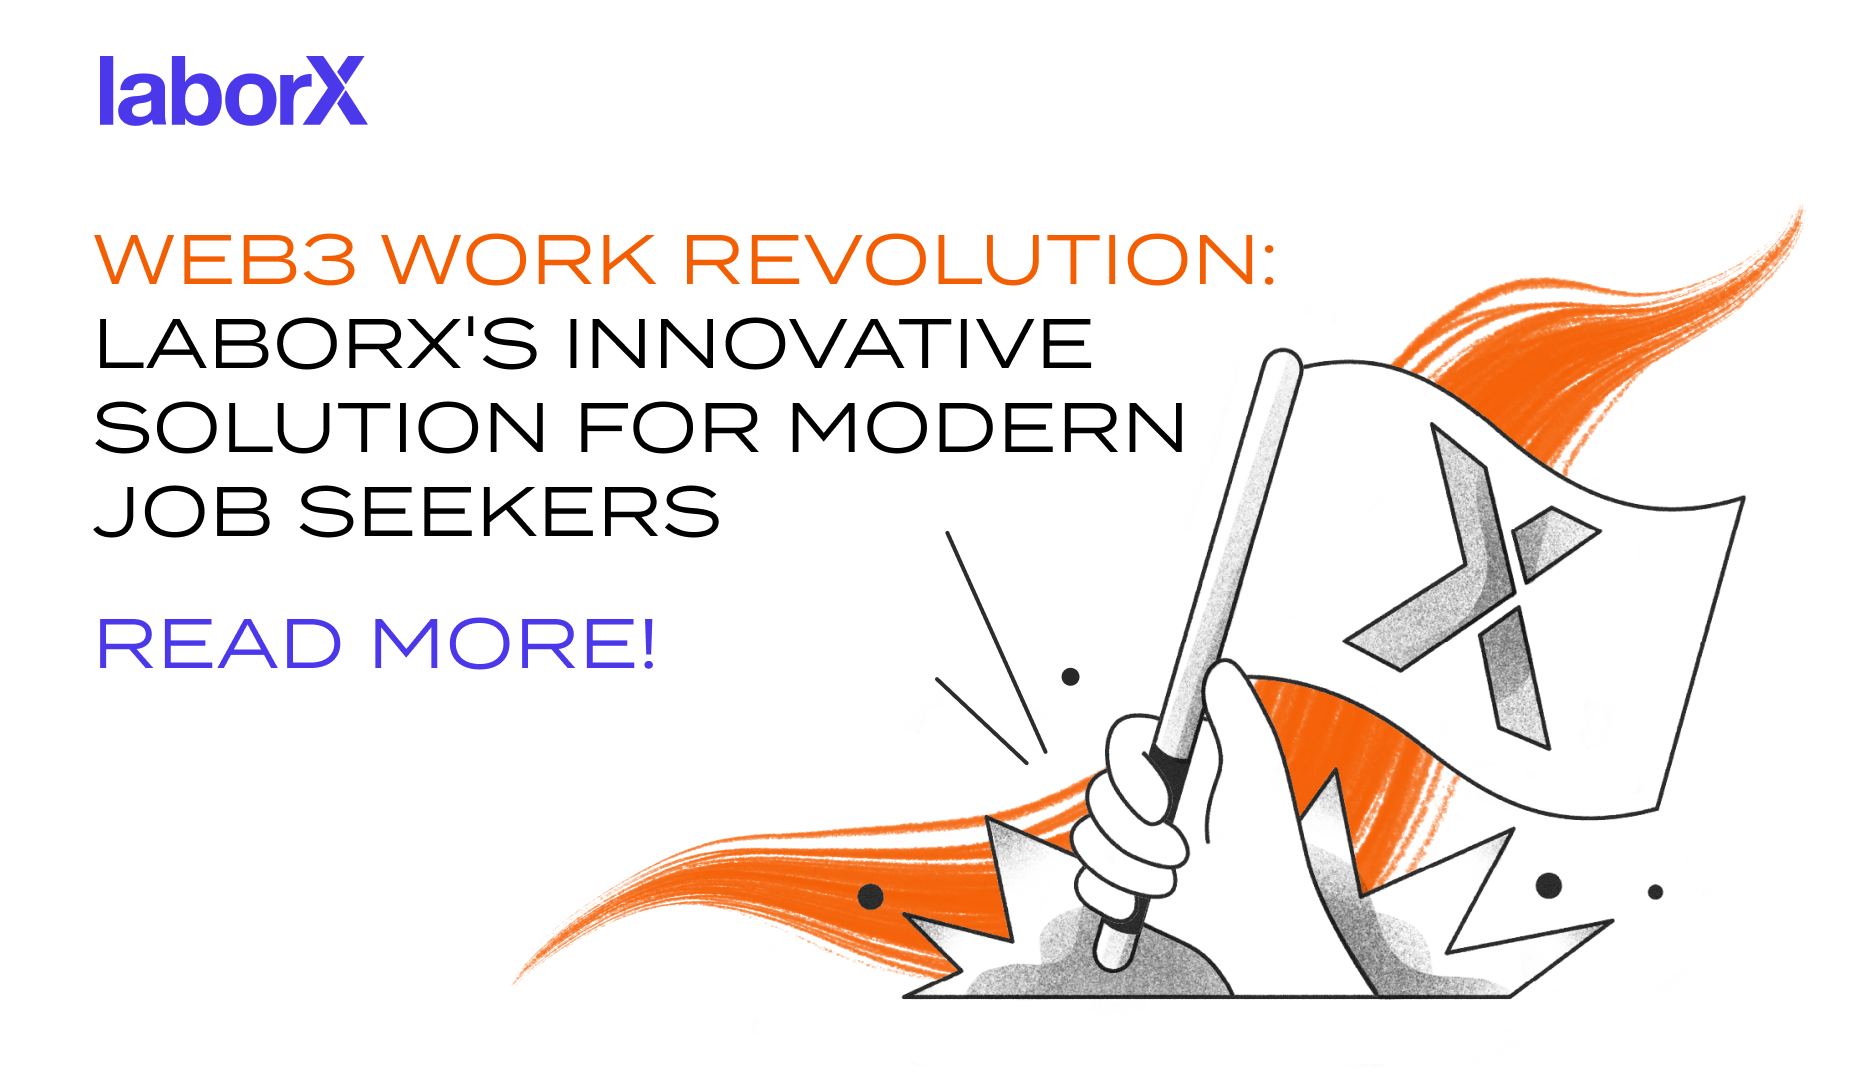 LaborX: A Blockchain-Powered Solution To The Web3 Work Revolution